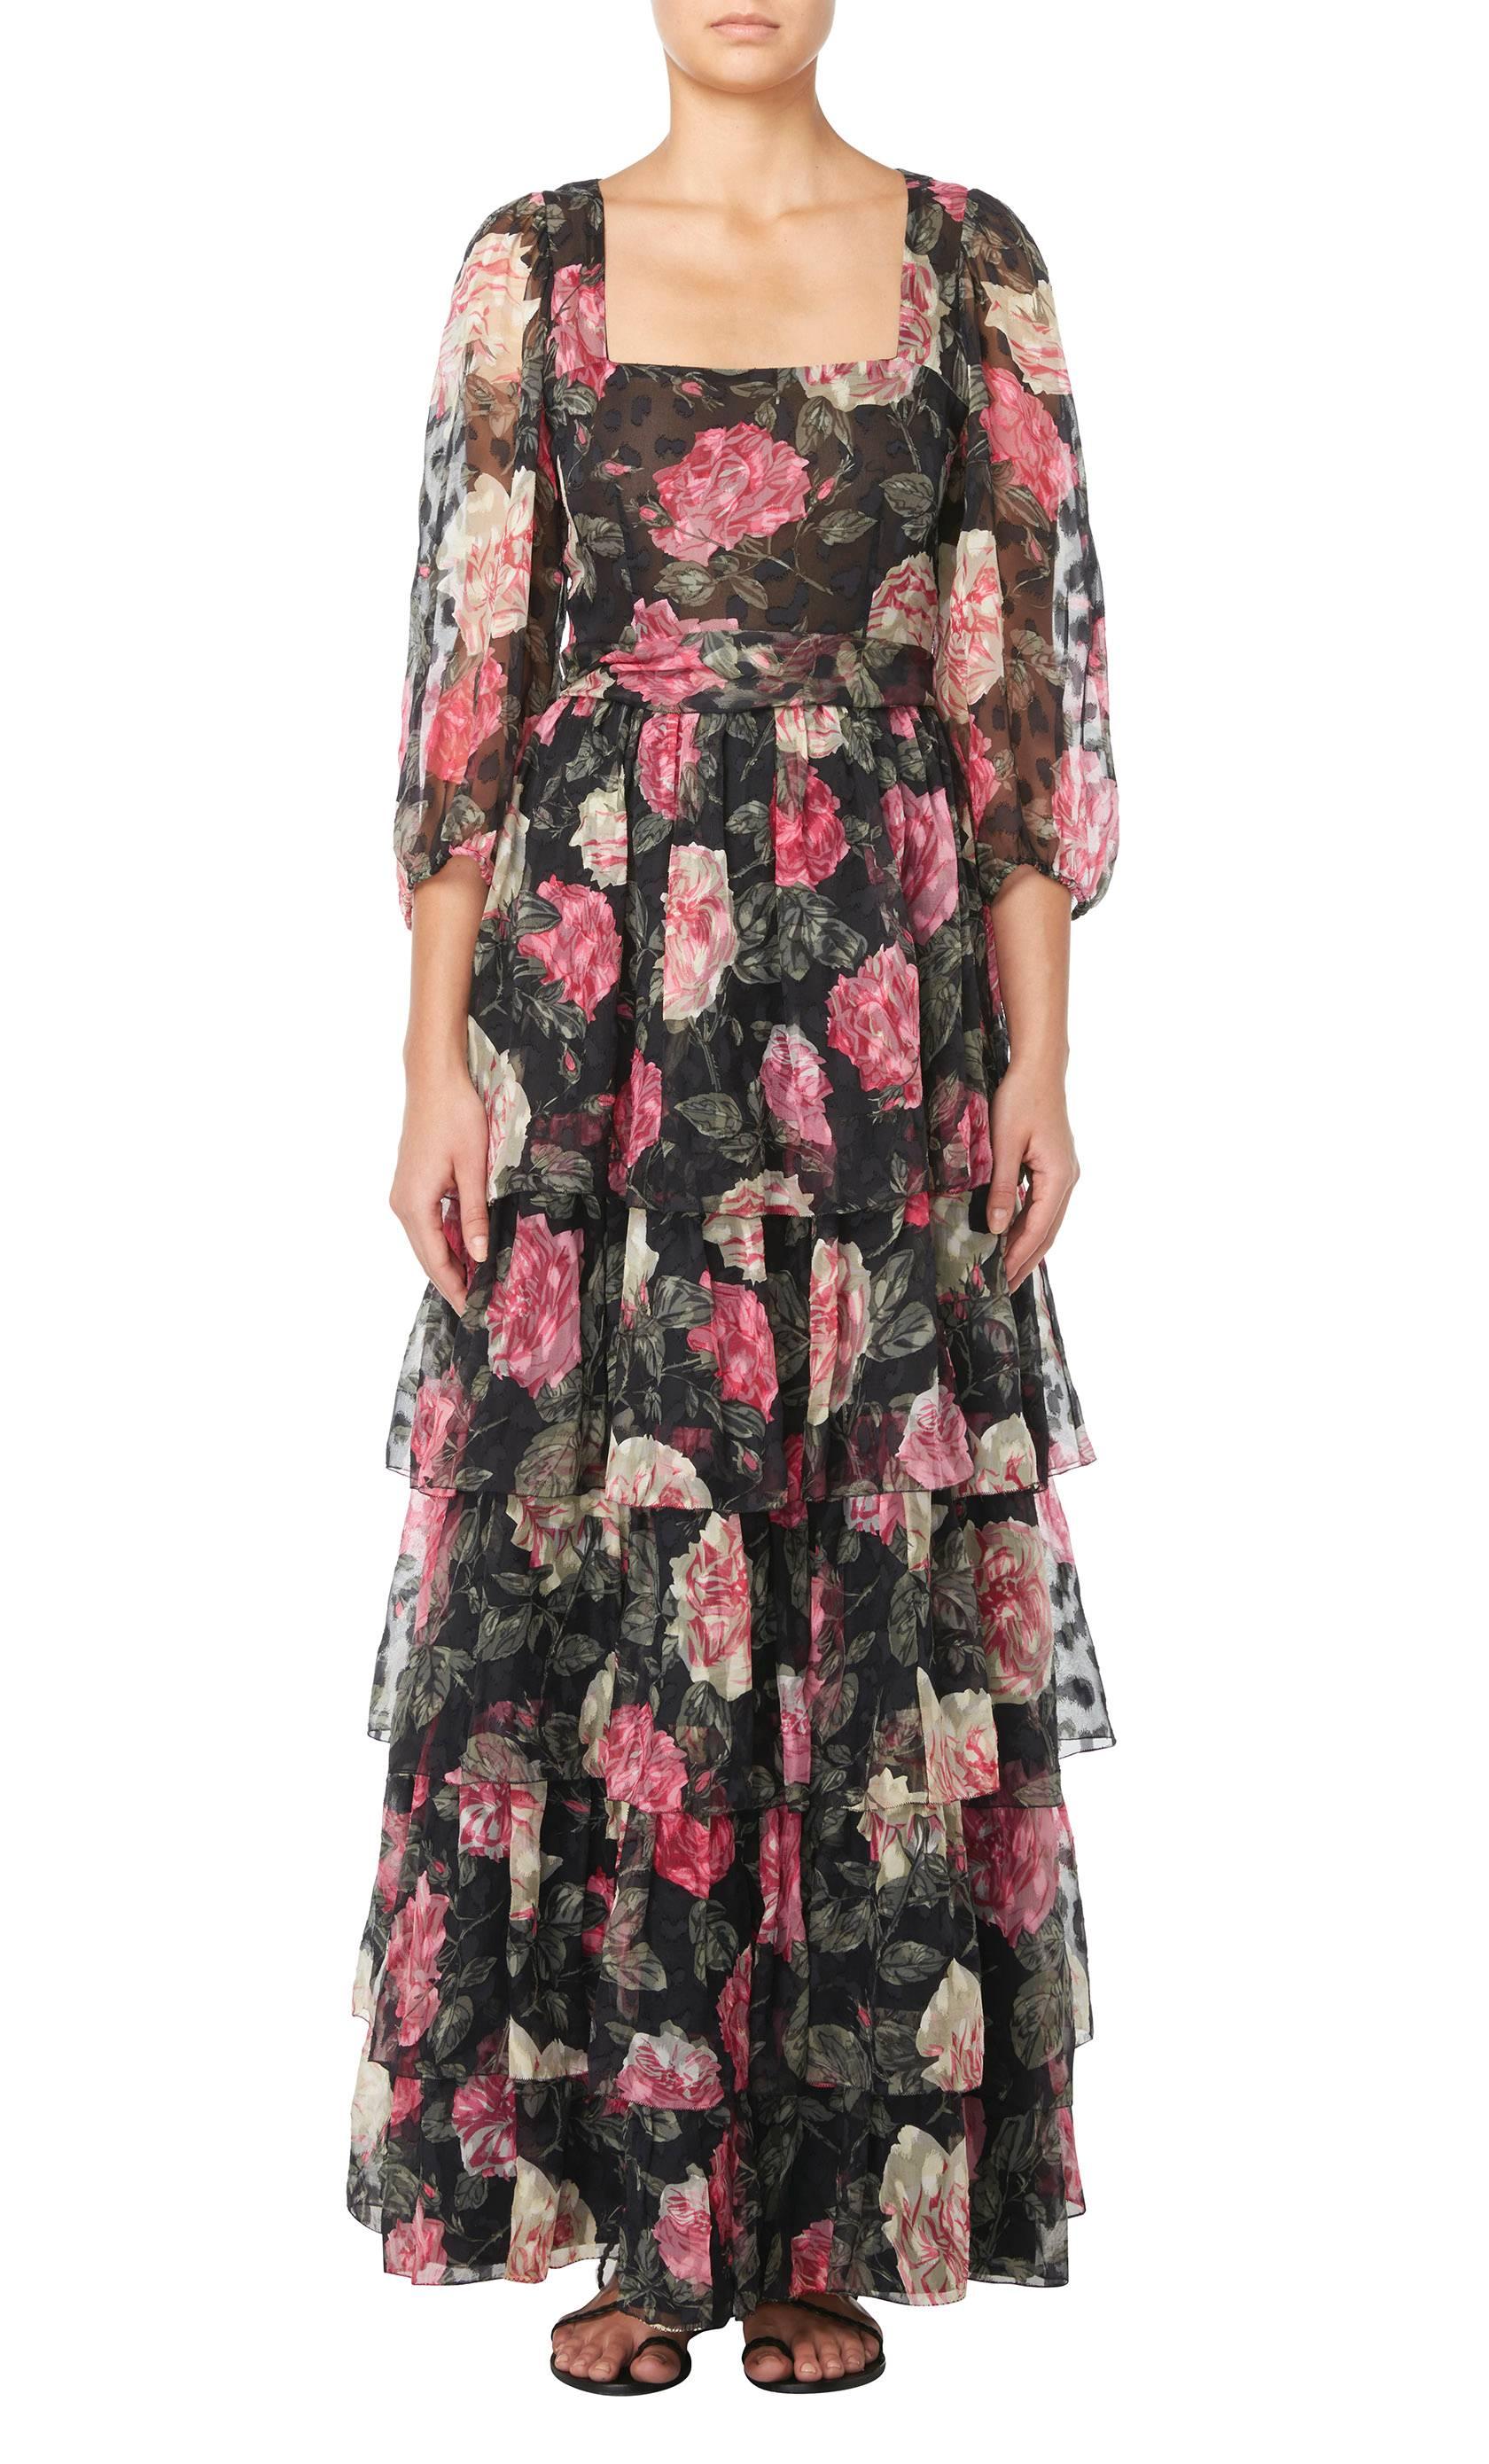 This beautiful Thea Porter couture floral dress is incredibly feminine and would make the ideal choice for a summer garden party. Constructed in black chiffon and featuring a pink, ivory and green floral print, the dress features a flattering square